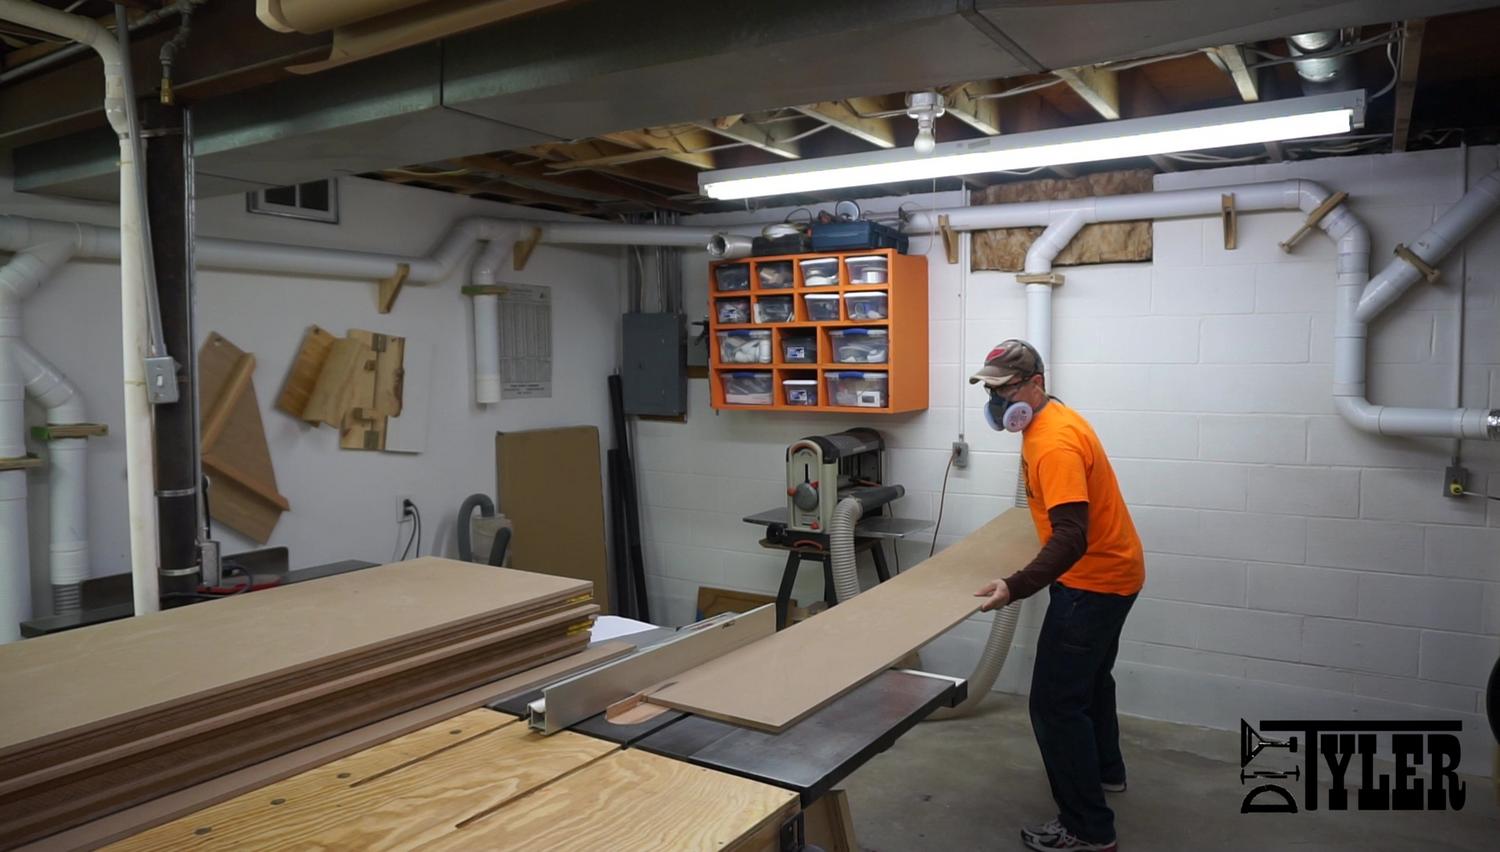 Lots of MDF cutting on the table saw